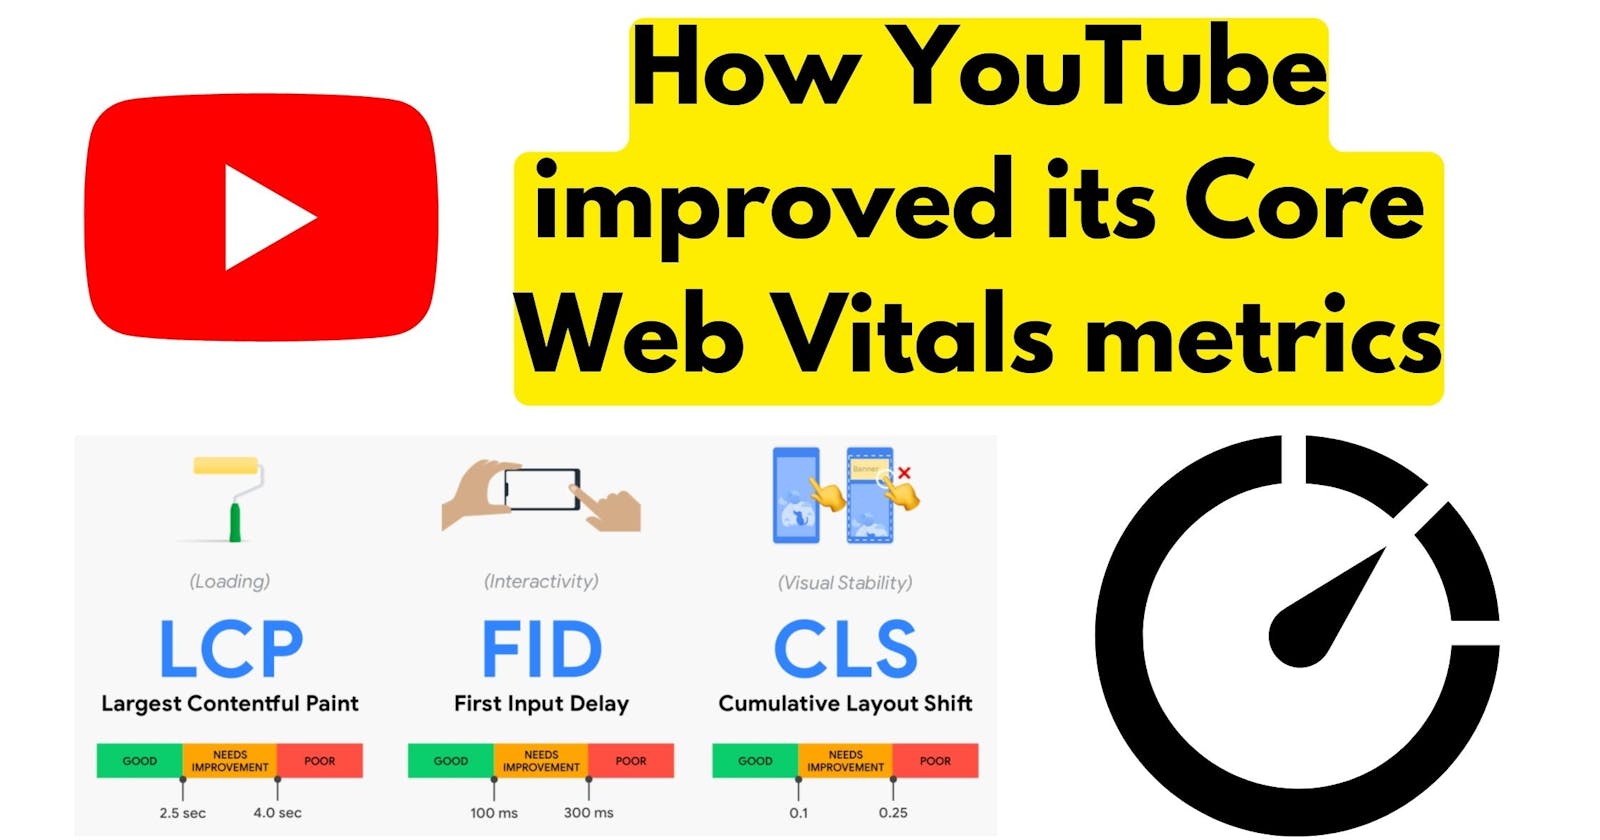 How YouTube built a faster experience for developing countries by improving Core Web Vitals